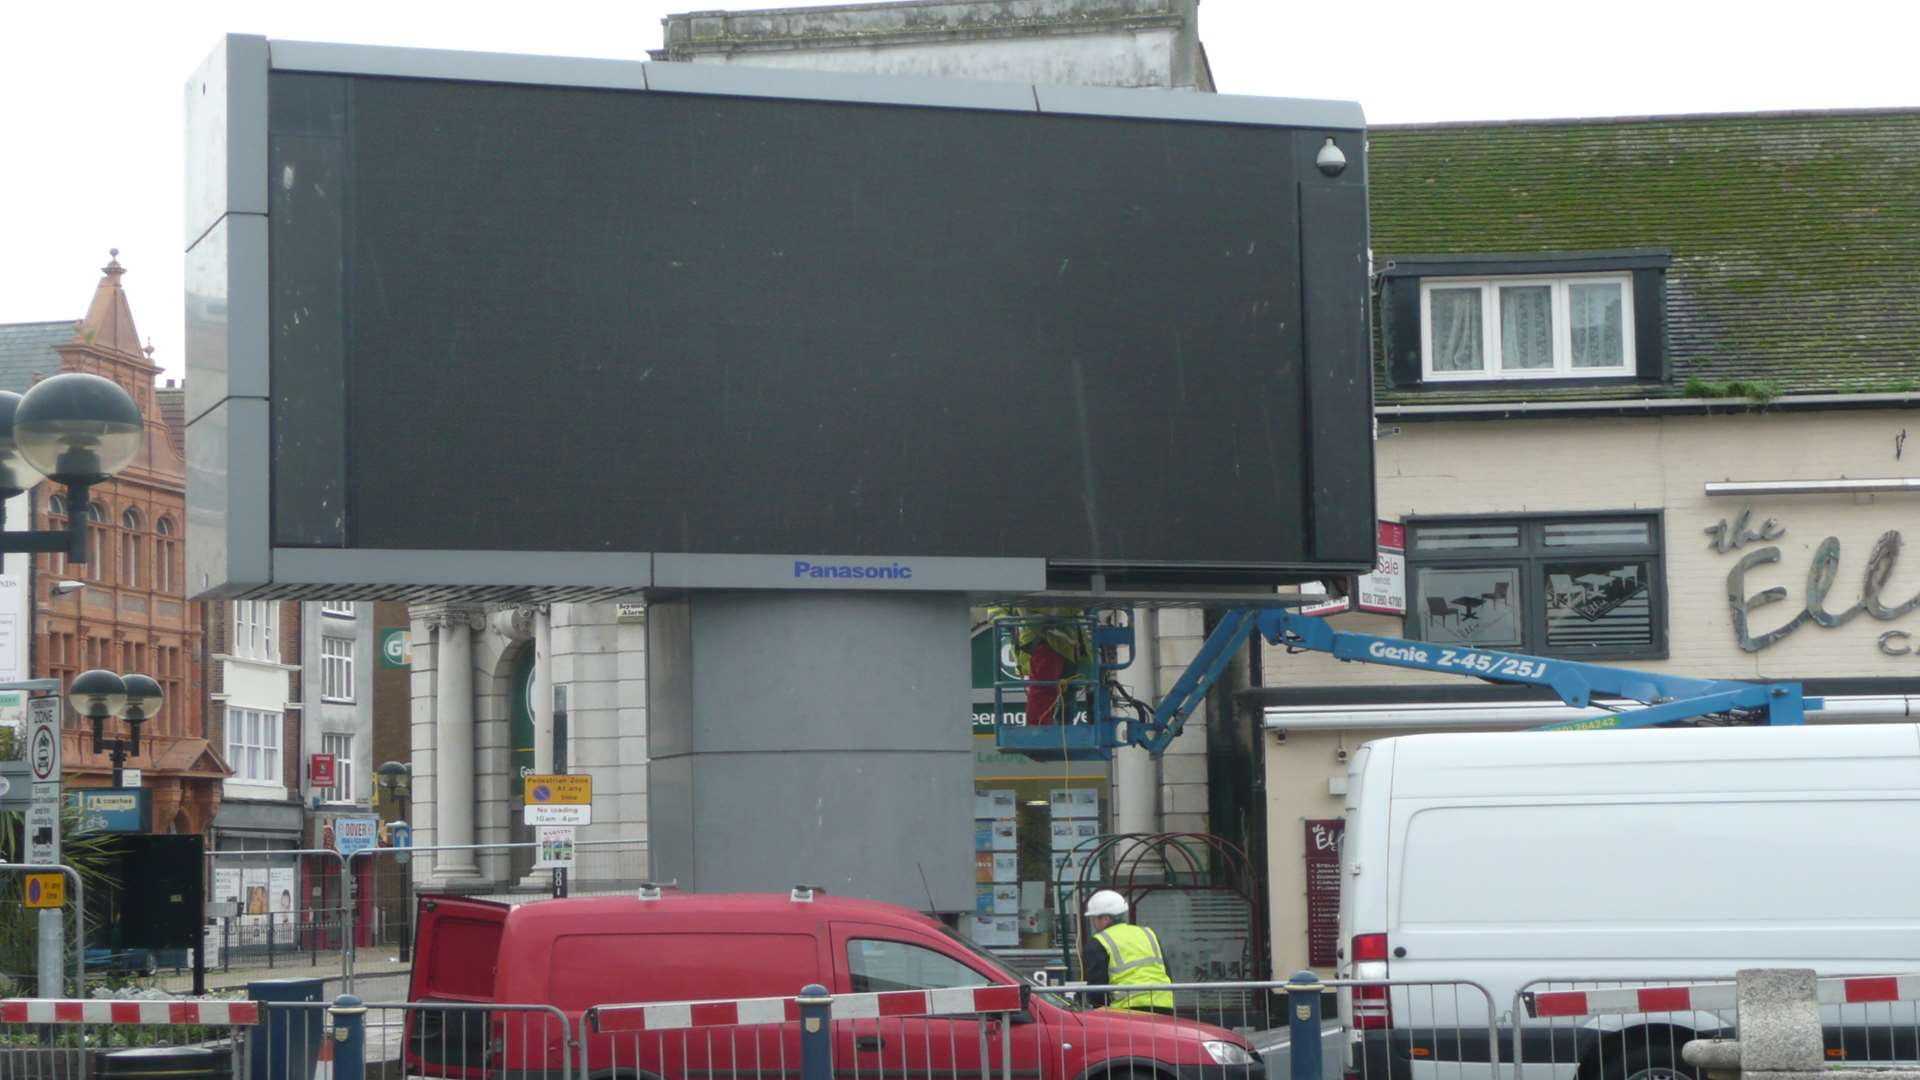 Work starts on dismantling the Big Screen in Dover's Market Square